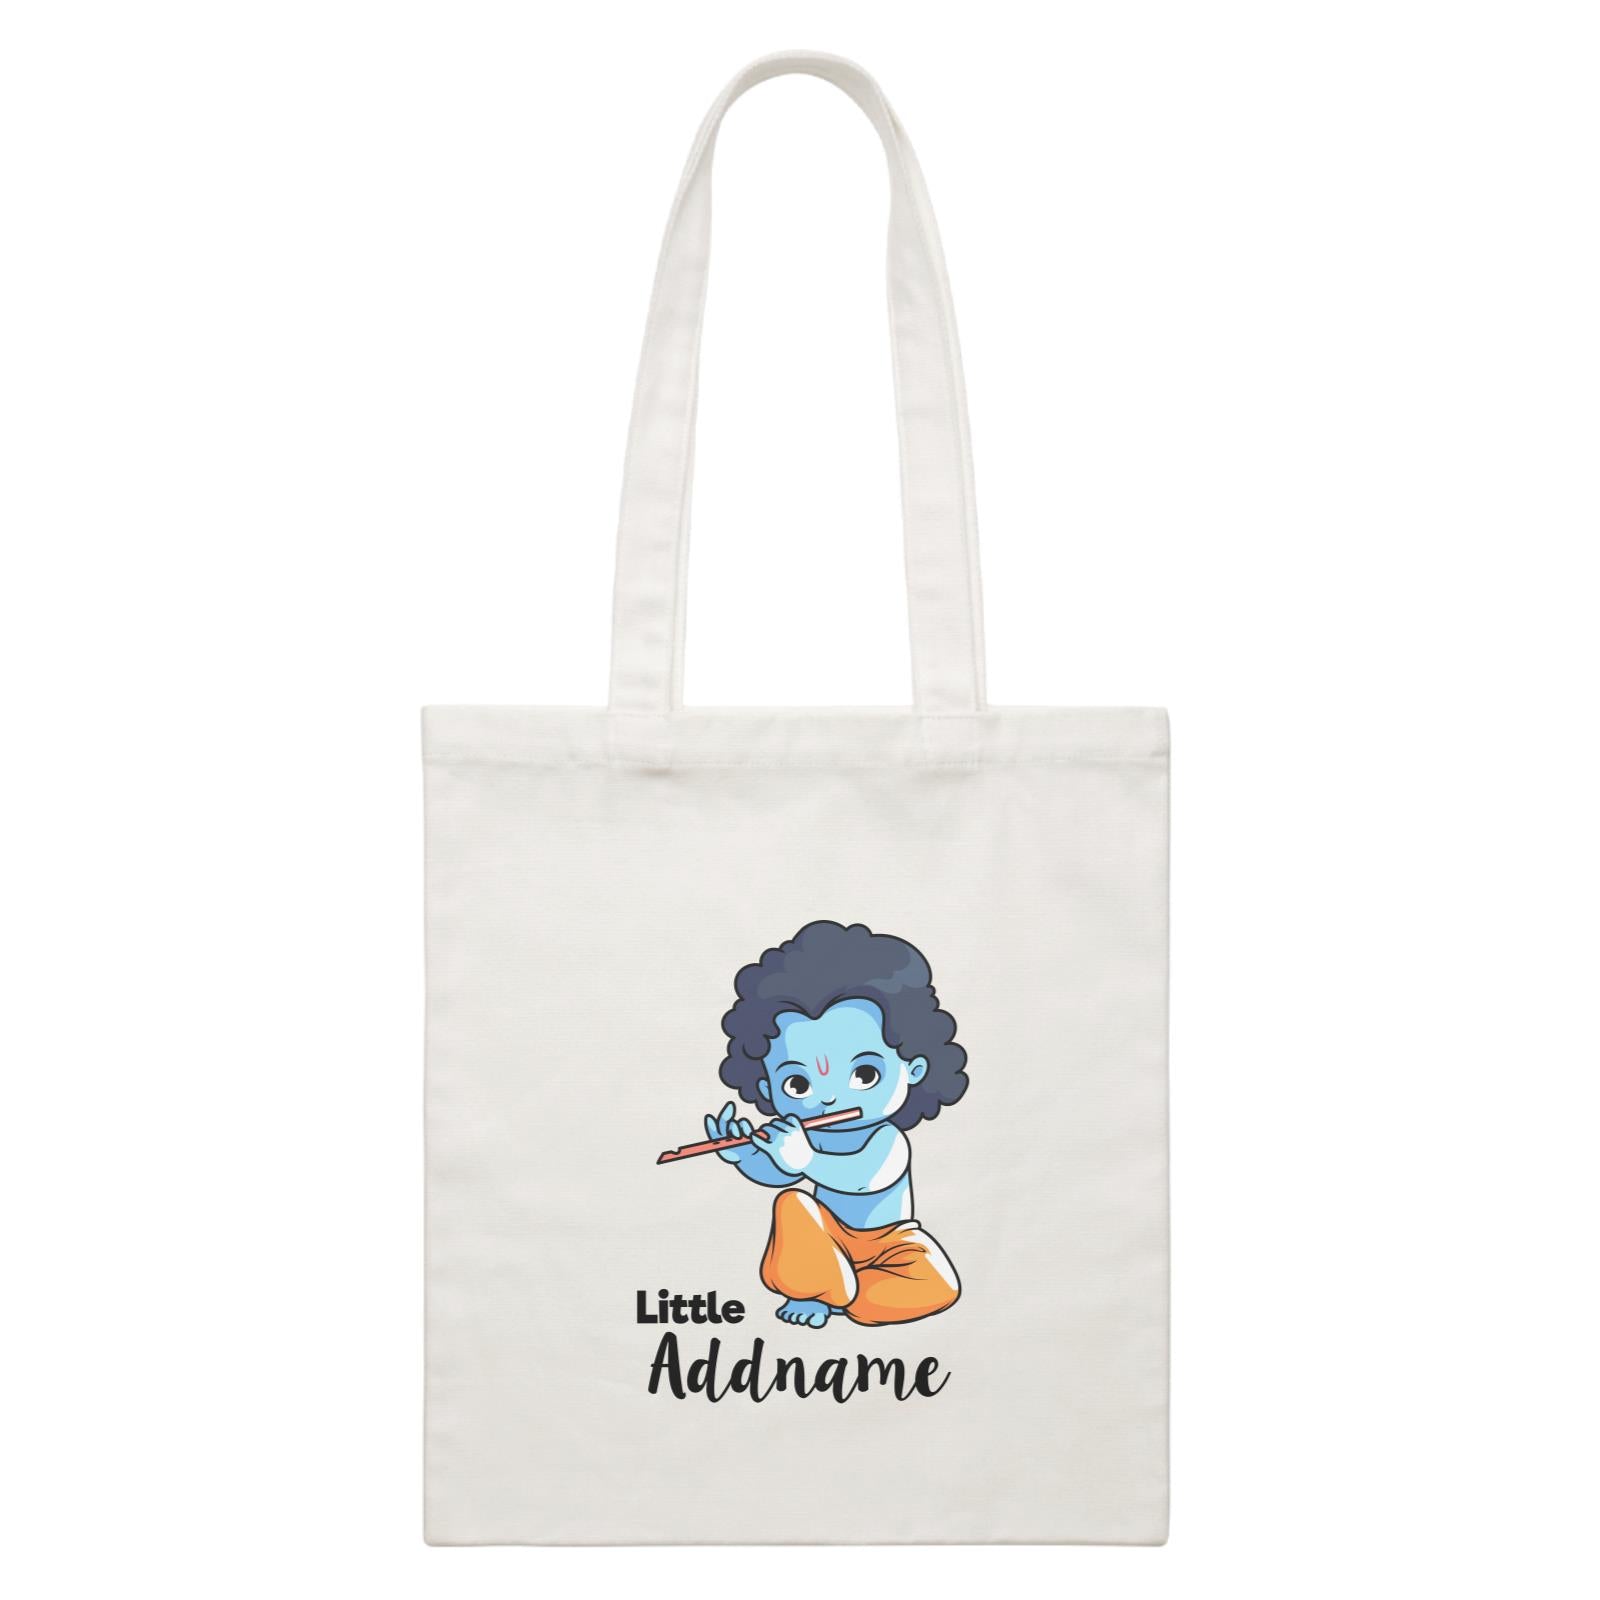 Cute Krishna Sitting Playing Flute Little Addname White Canvas Bag